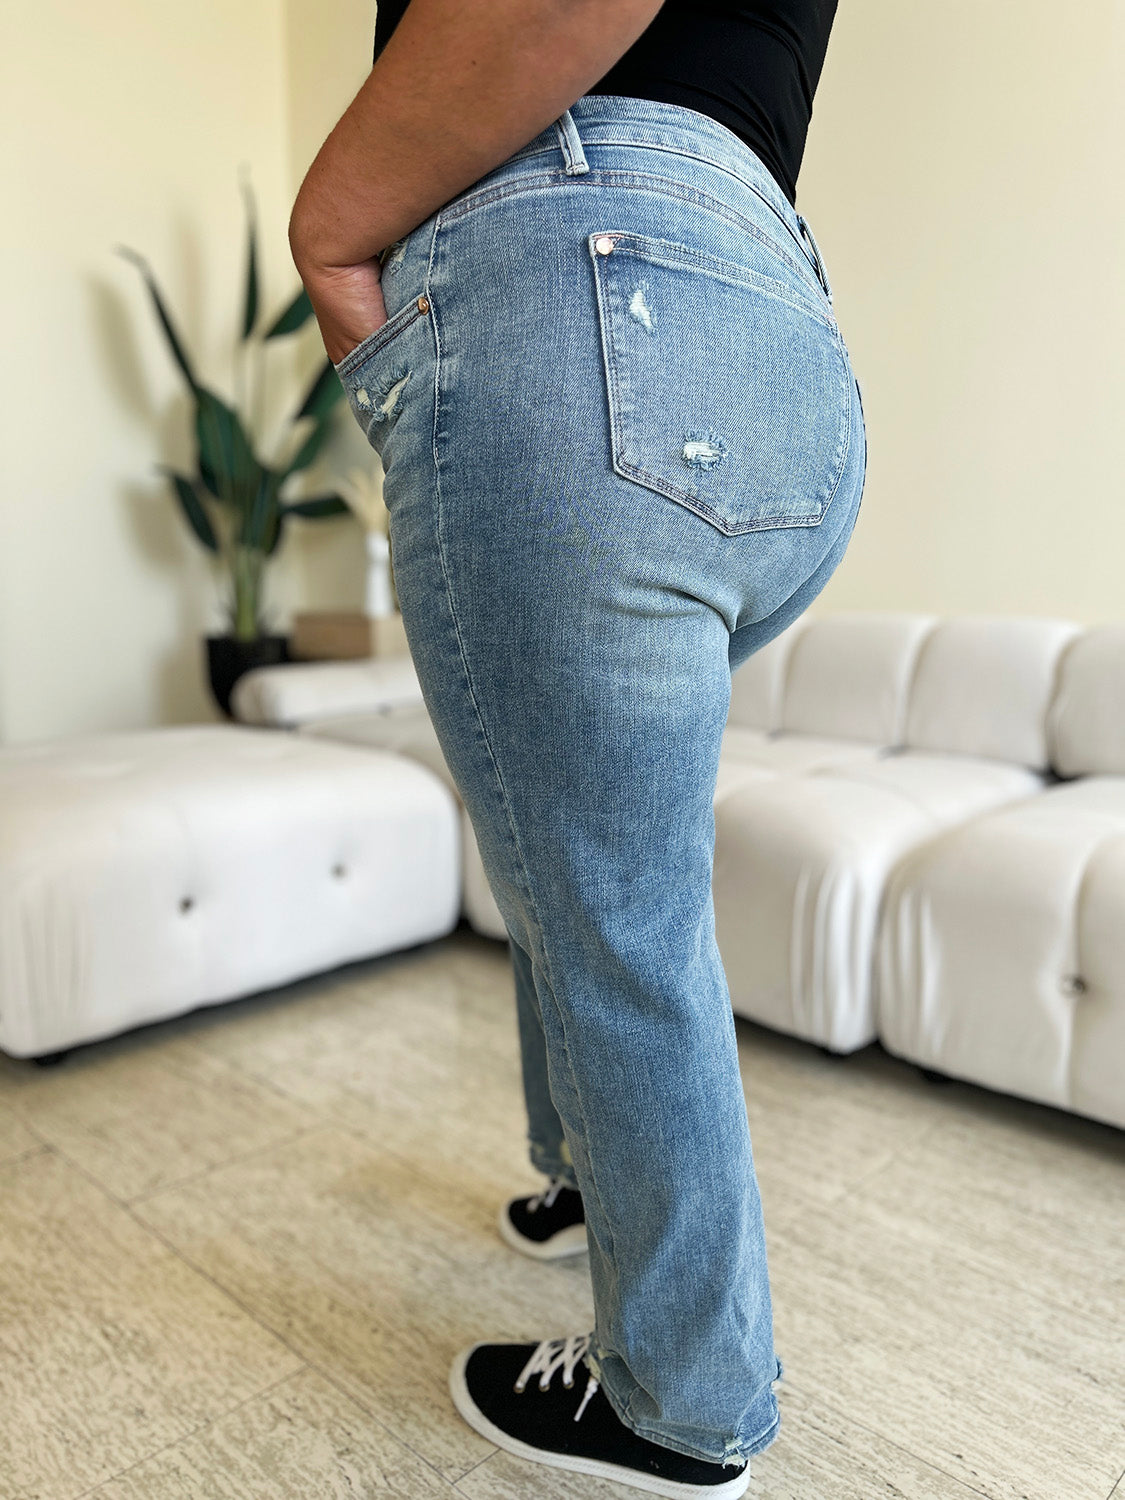 Full Size High Waist Distressed Straight Jeans